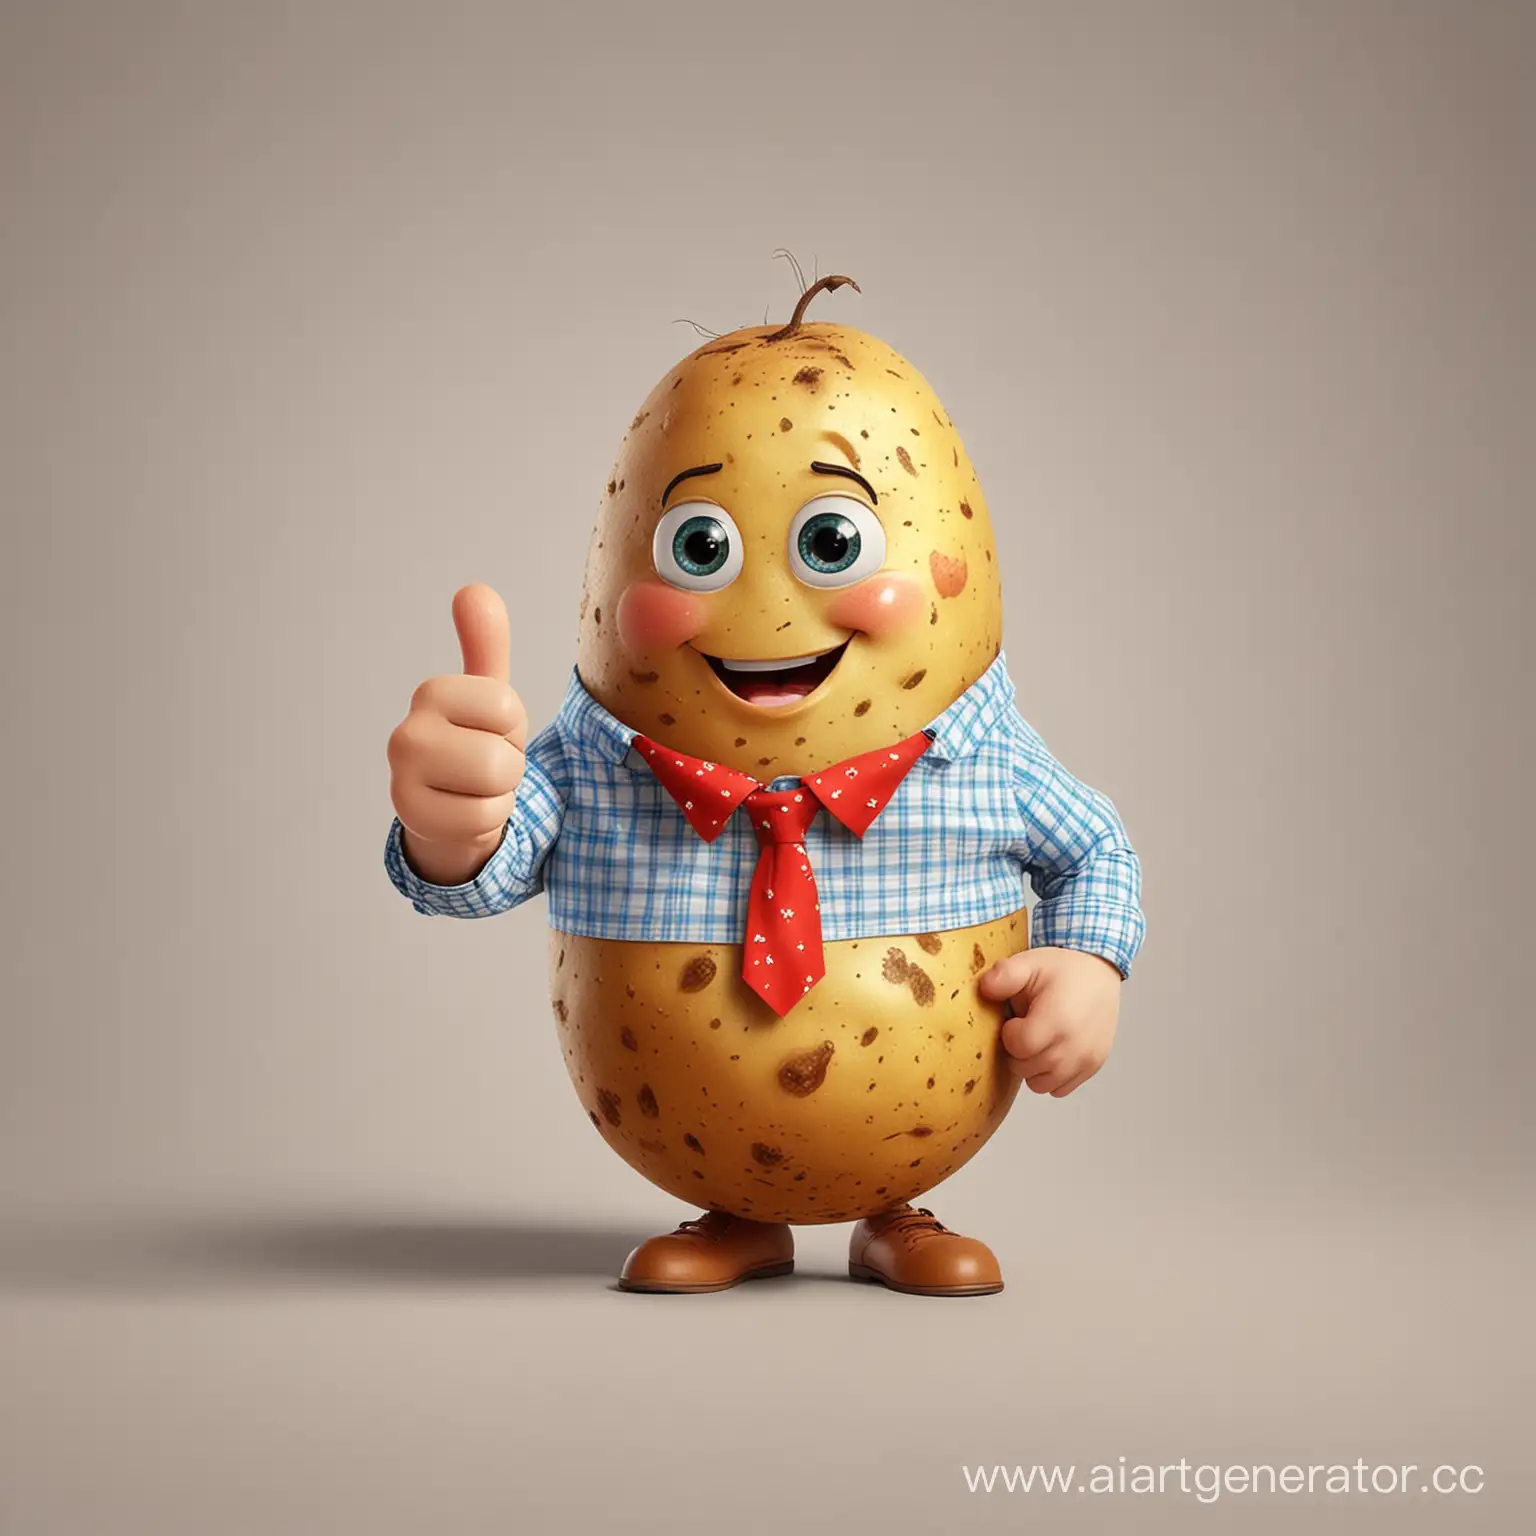 Cheerful-Potato-in-a-Stylish-Collared-Shirt-Gestures-Thumbs-Up